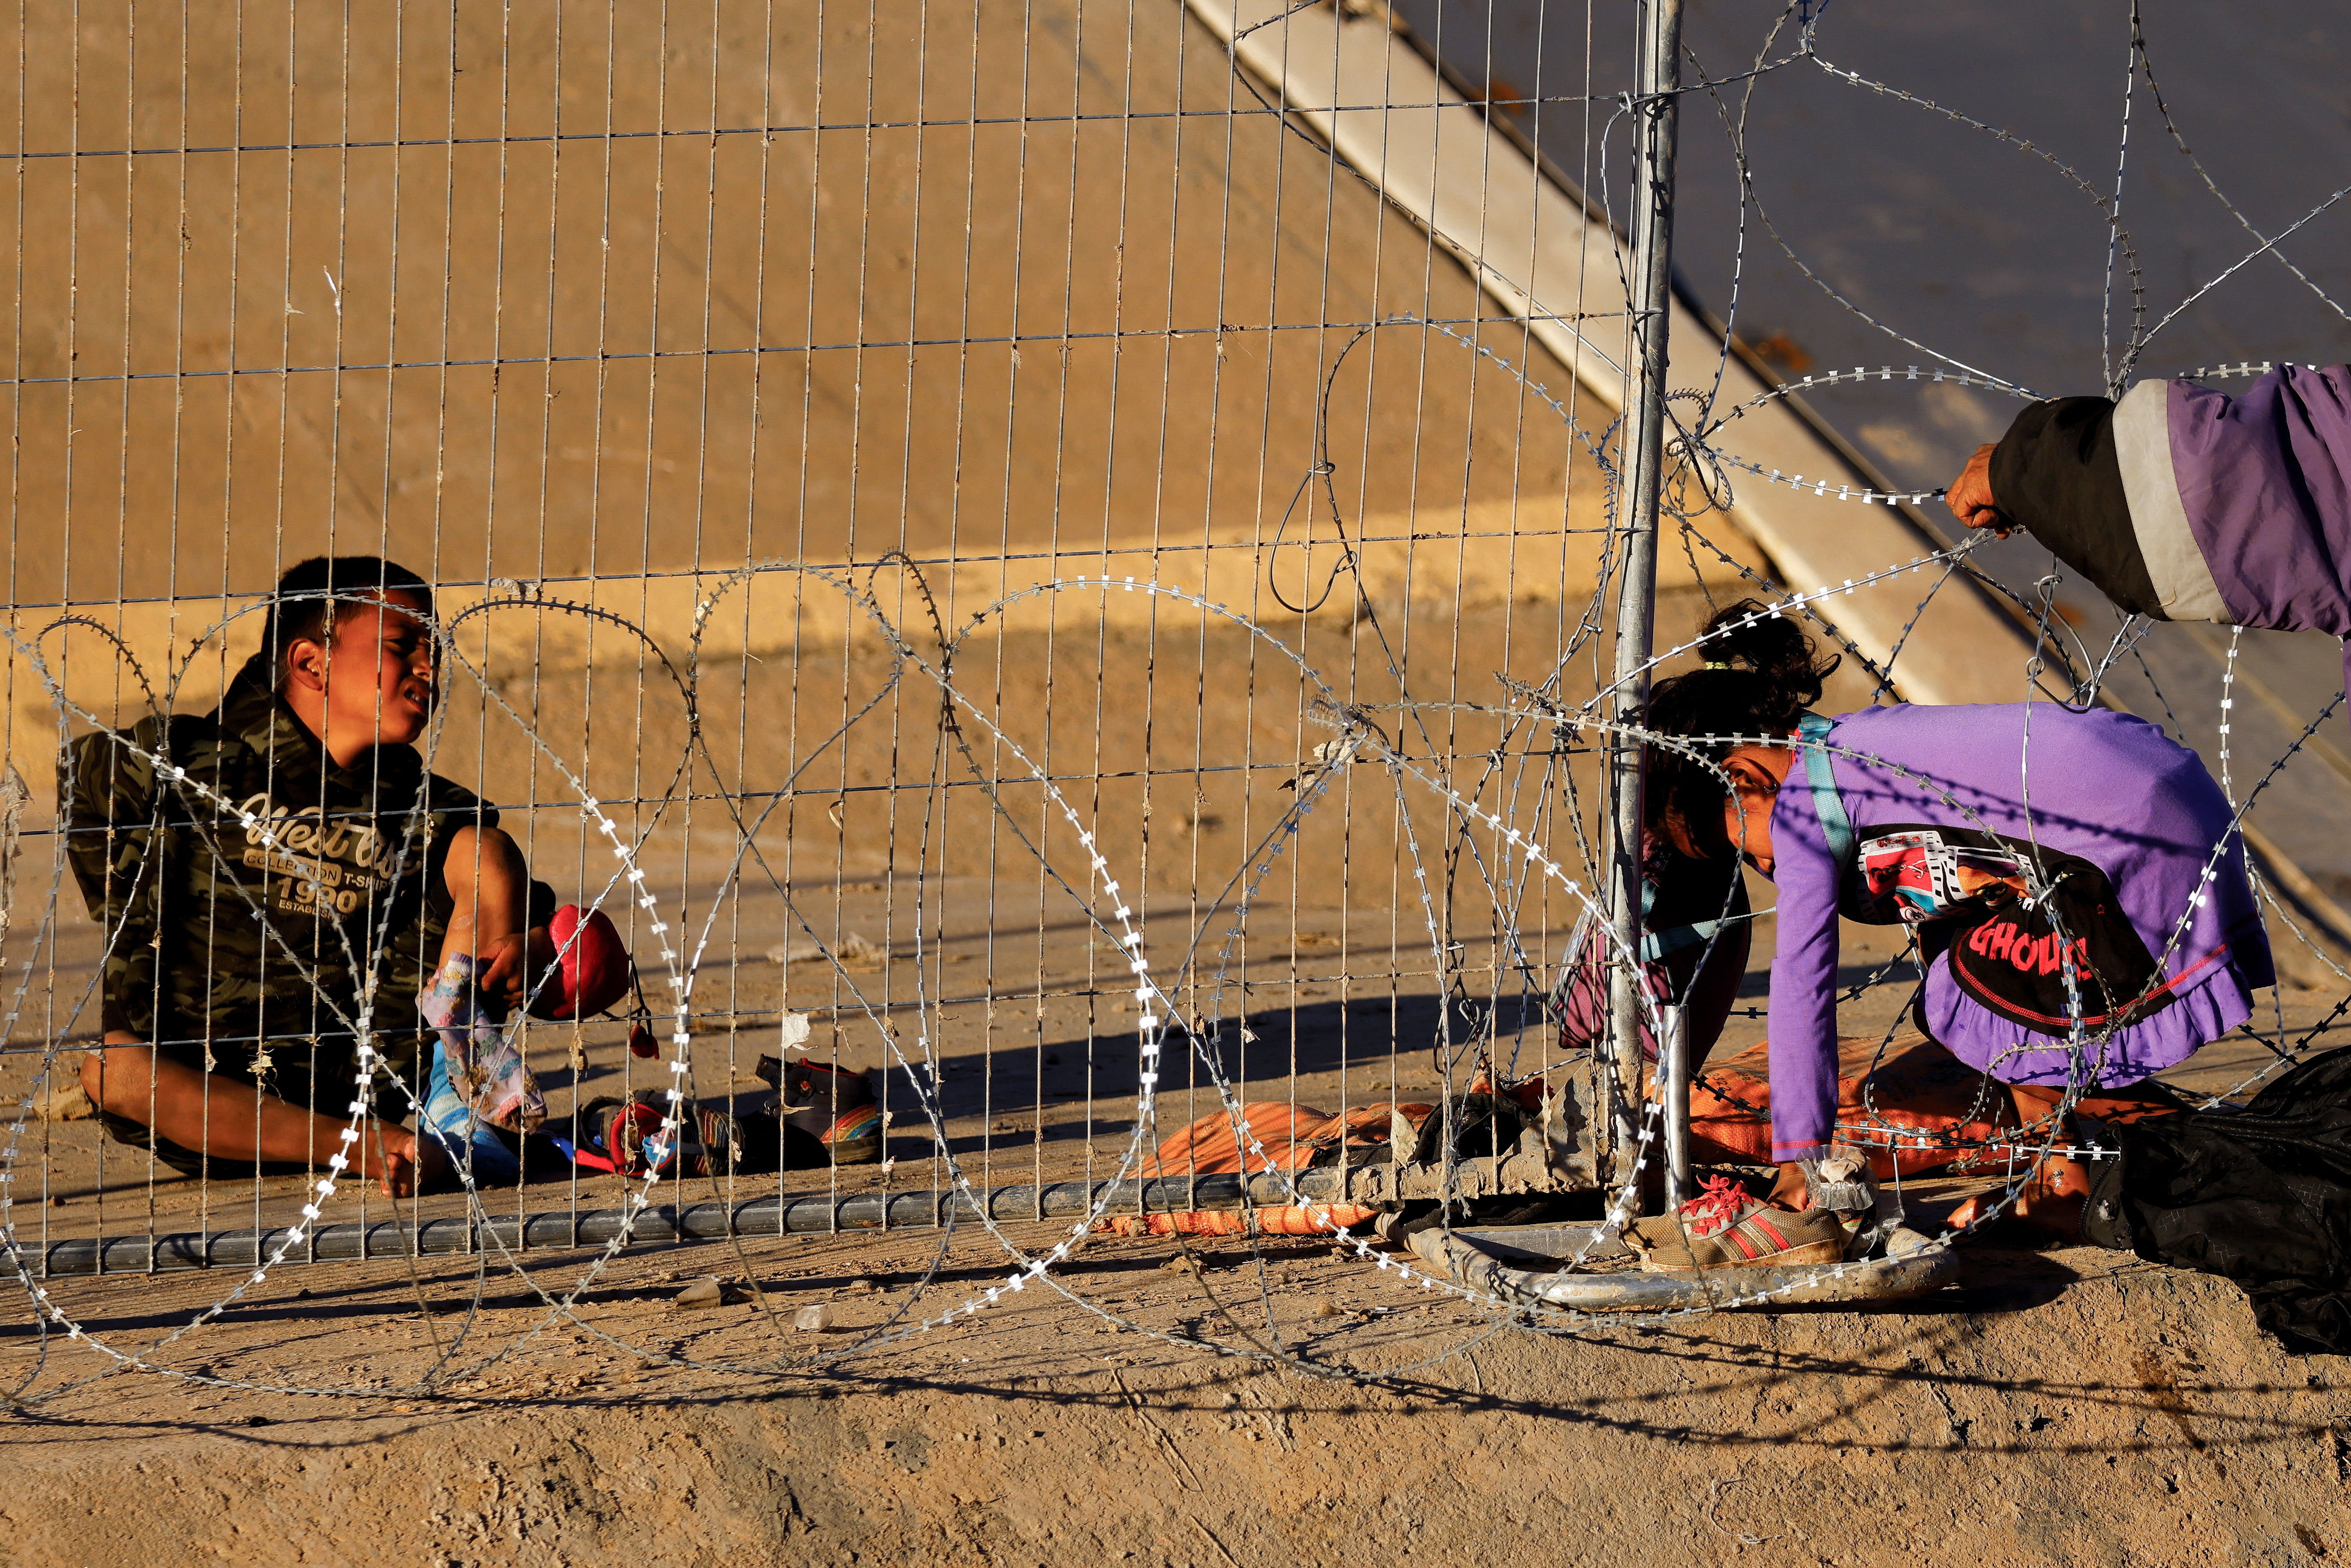 Asylum-seeking migrants at the border between Mexico and the United States, in Ciudad Juarez